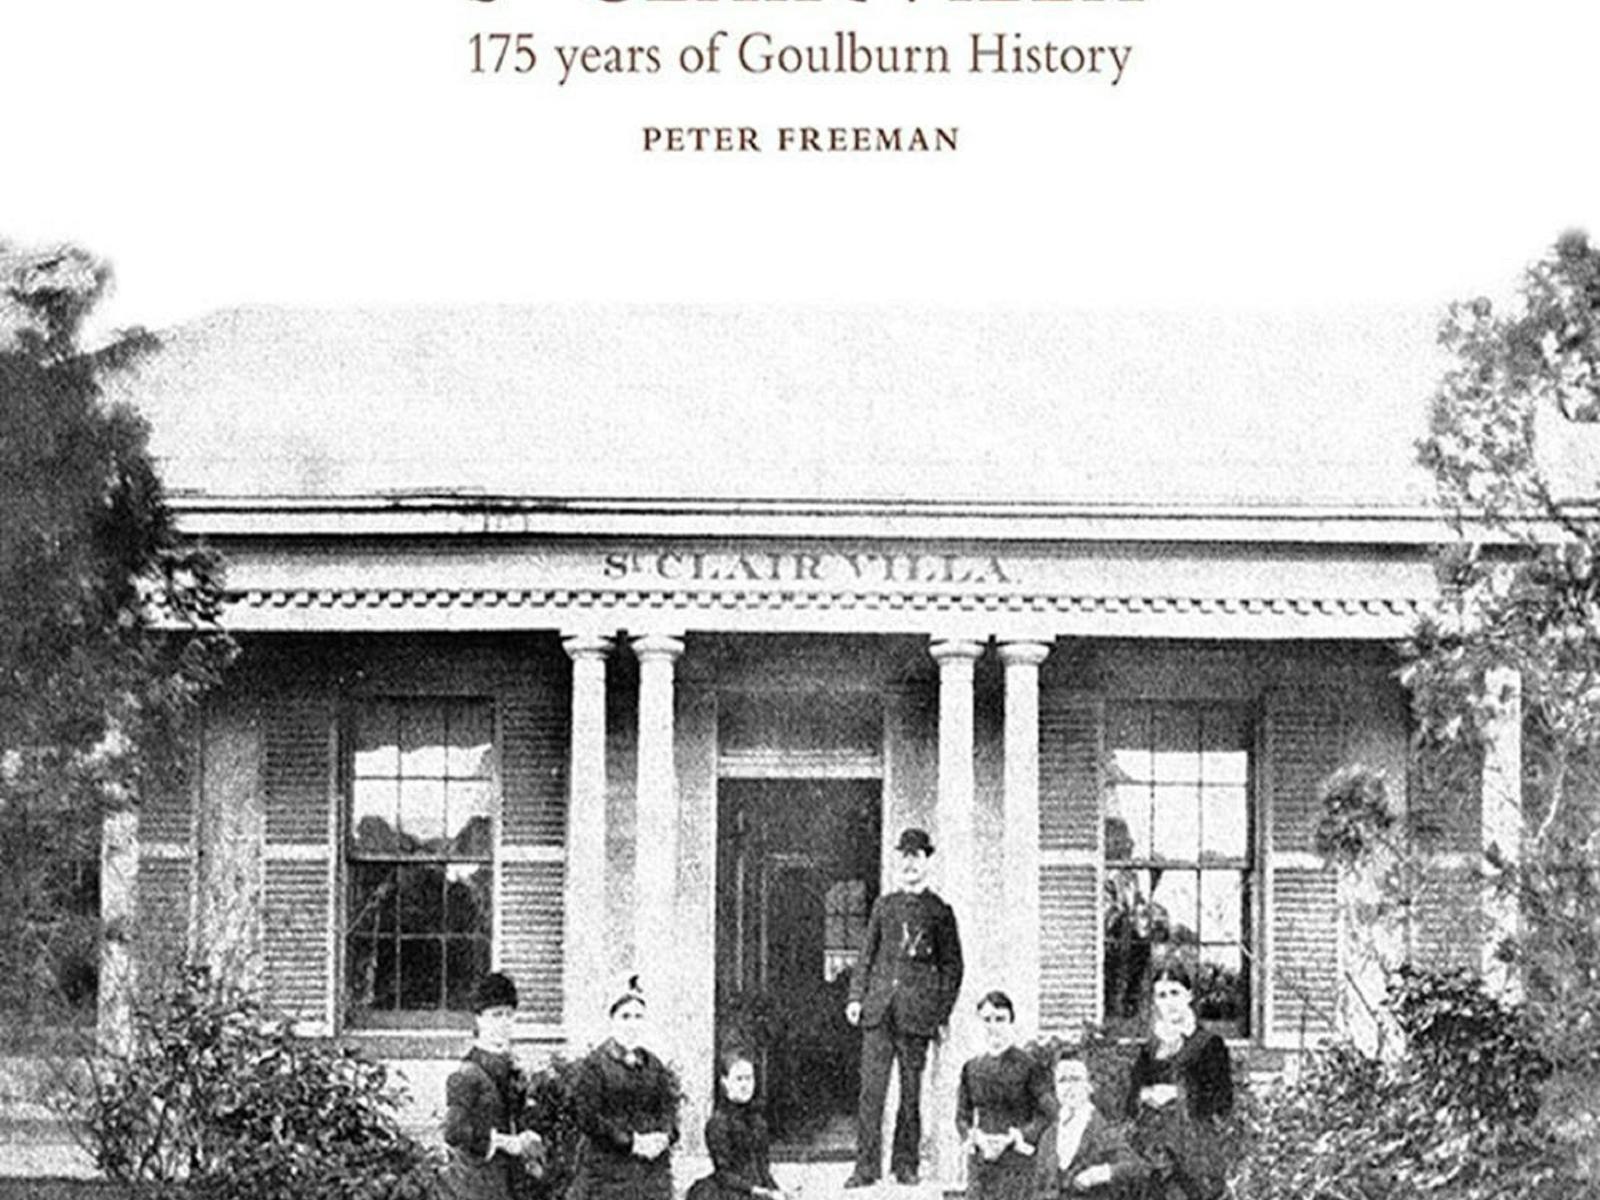 Image for Book Launch: St Clair Villa: 175 Years of Goulburn History with Peter Freeman